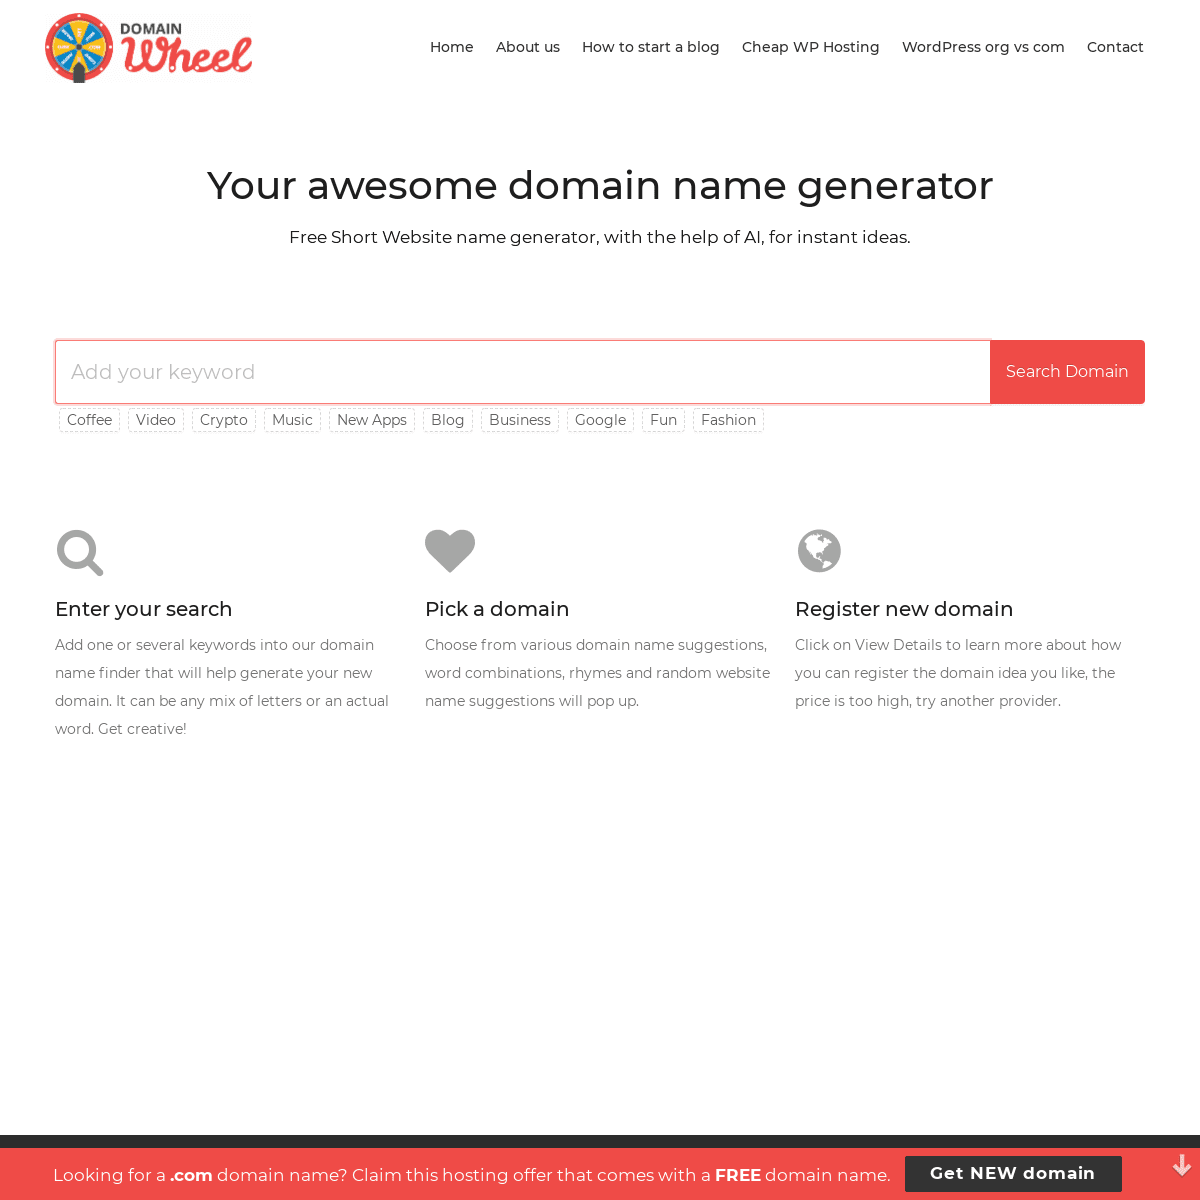 DomainWheel - Domain Name Generator (Instant Suggestions, no Ads)